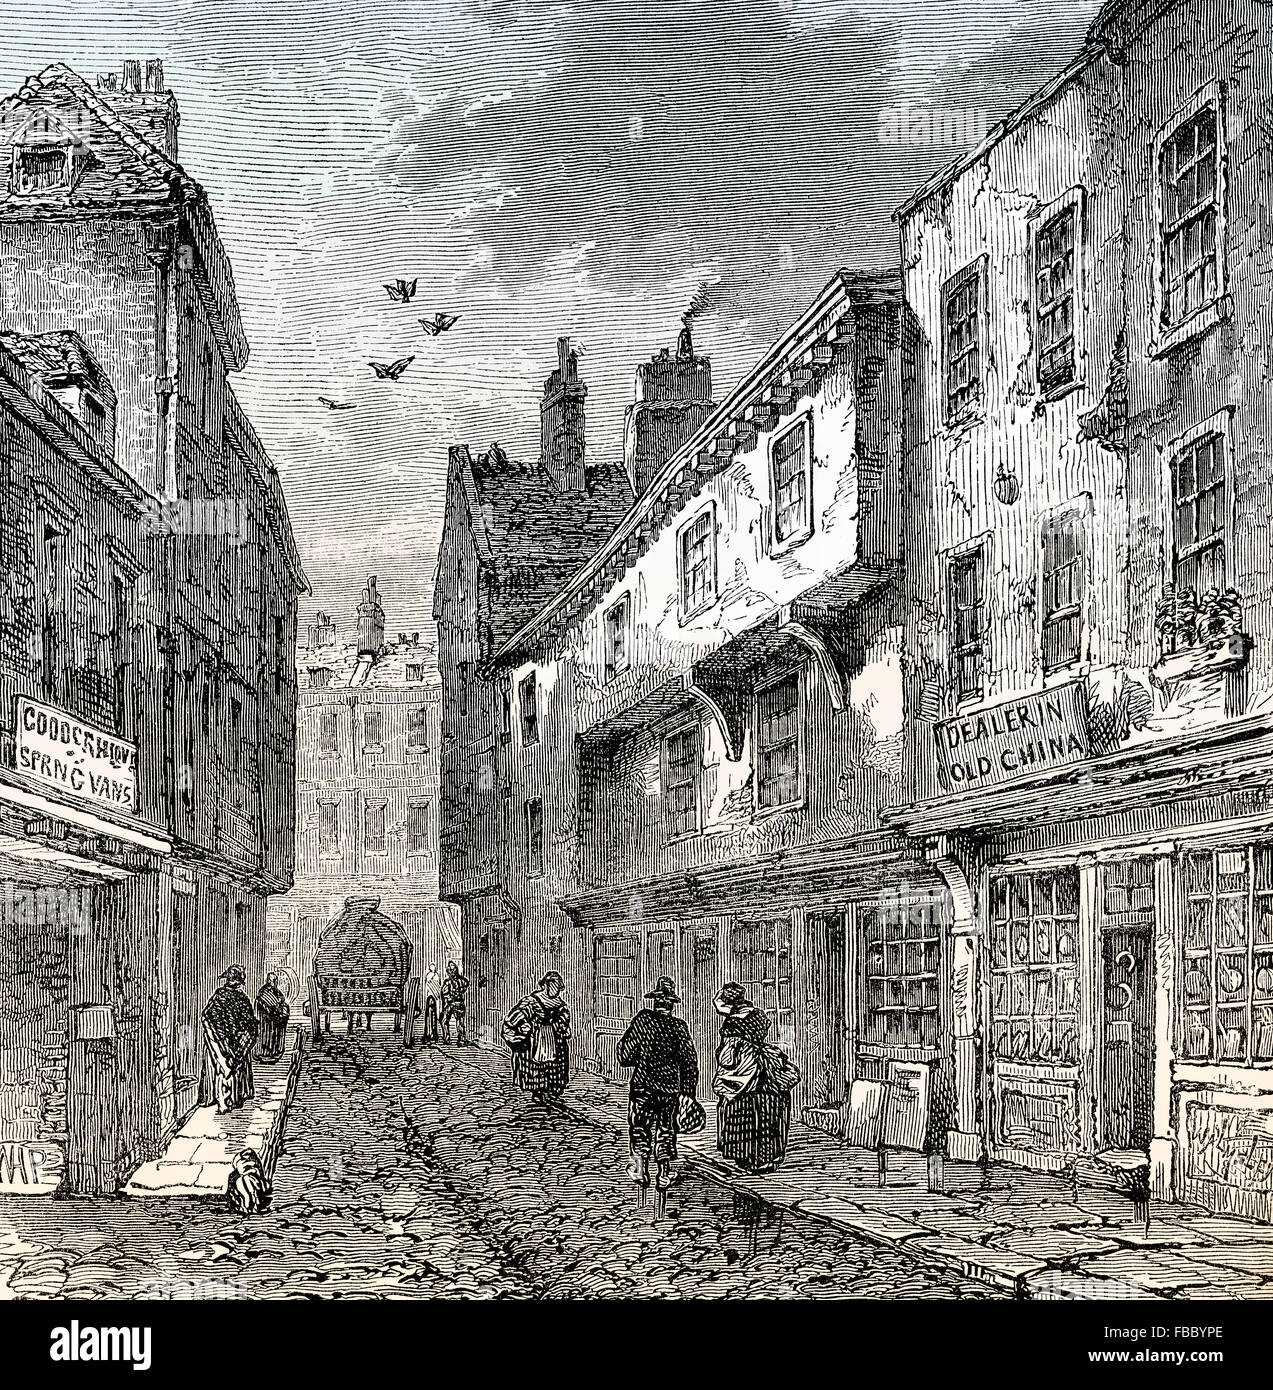 Leather Lane, a street in the Holborn area of London, England, 18th century Stock Photo